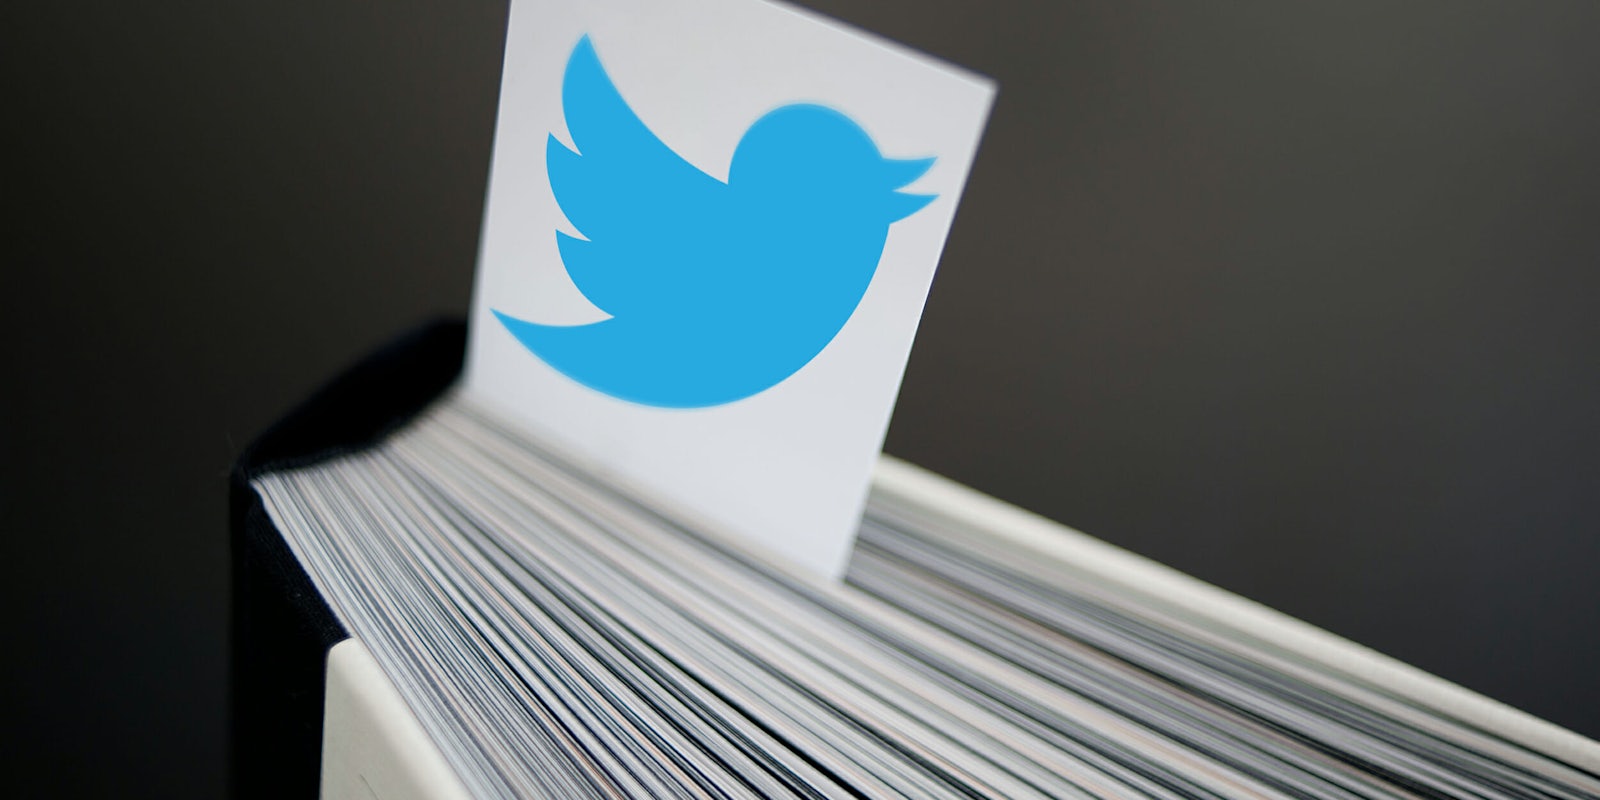 Bookmark with Twitter logo